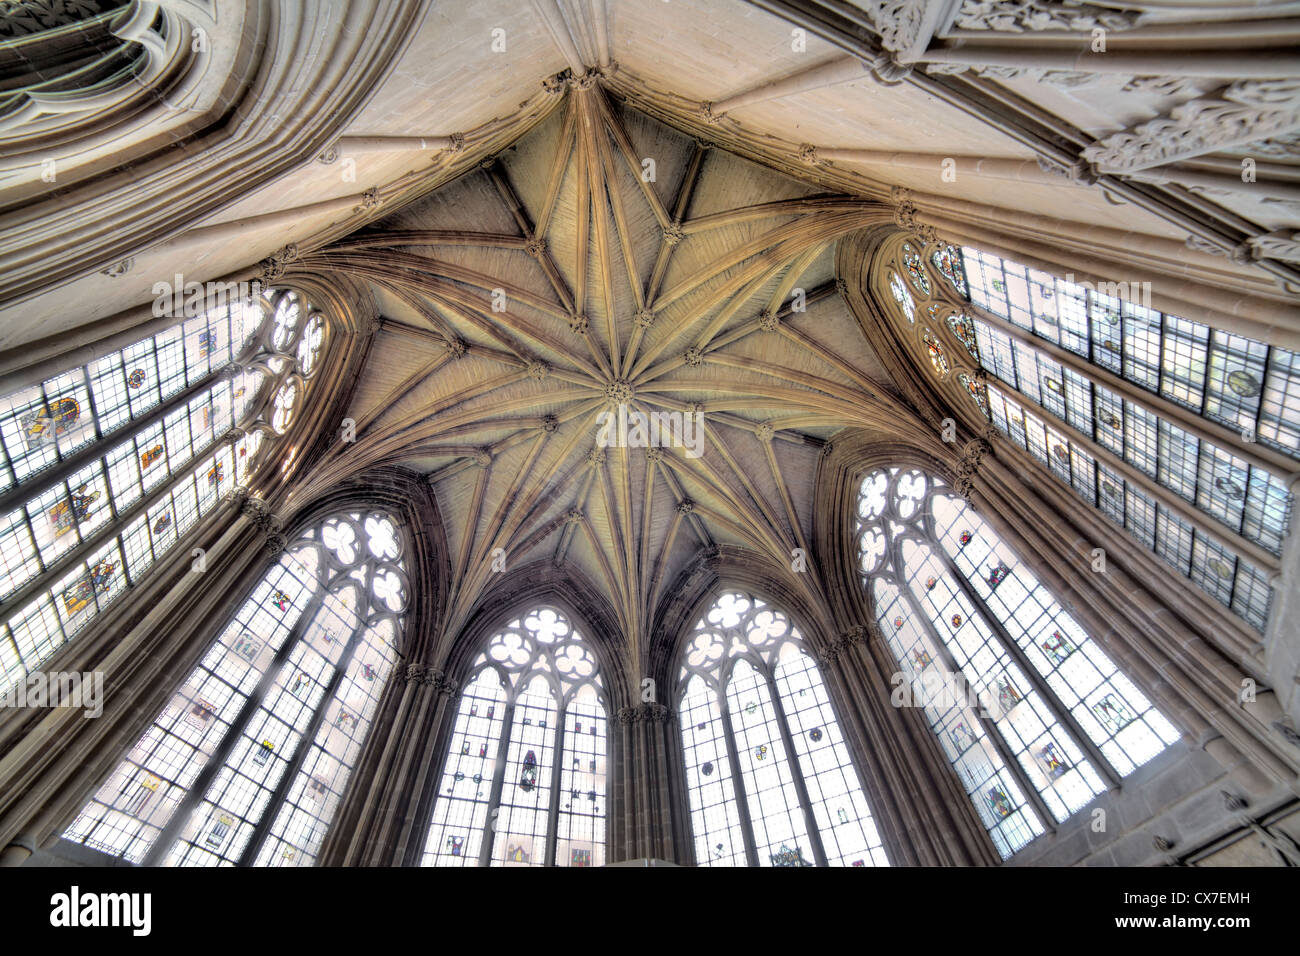 Chapter House, Southwell Minster, Southwell, Nottinghamshire, Angleterre, RU Banque D'Images